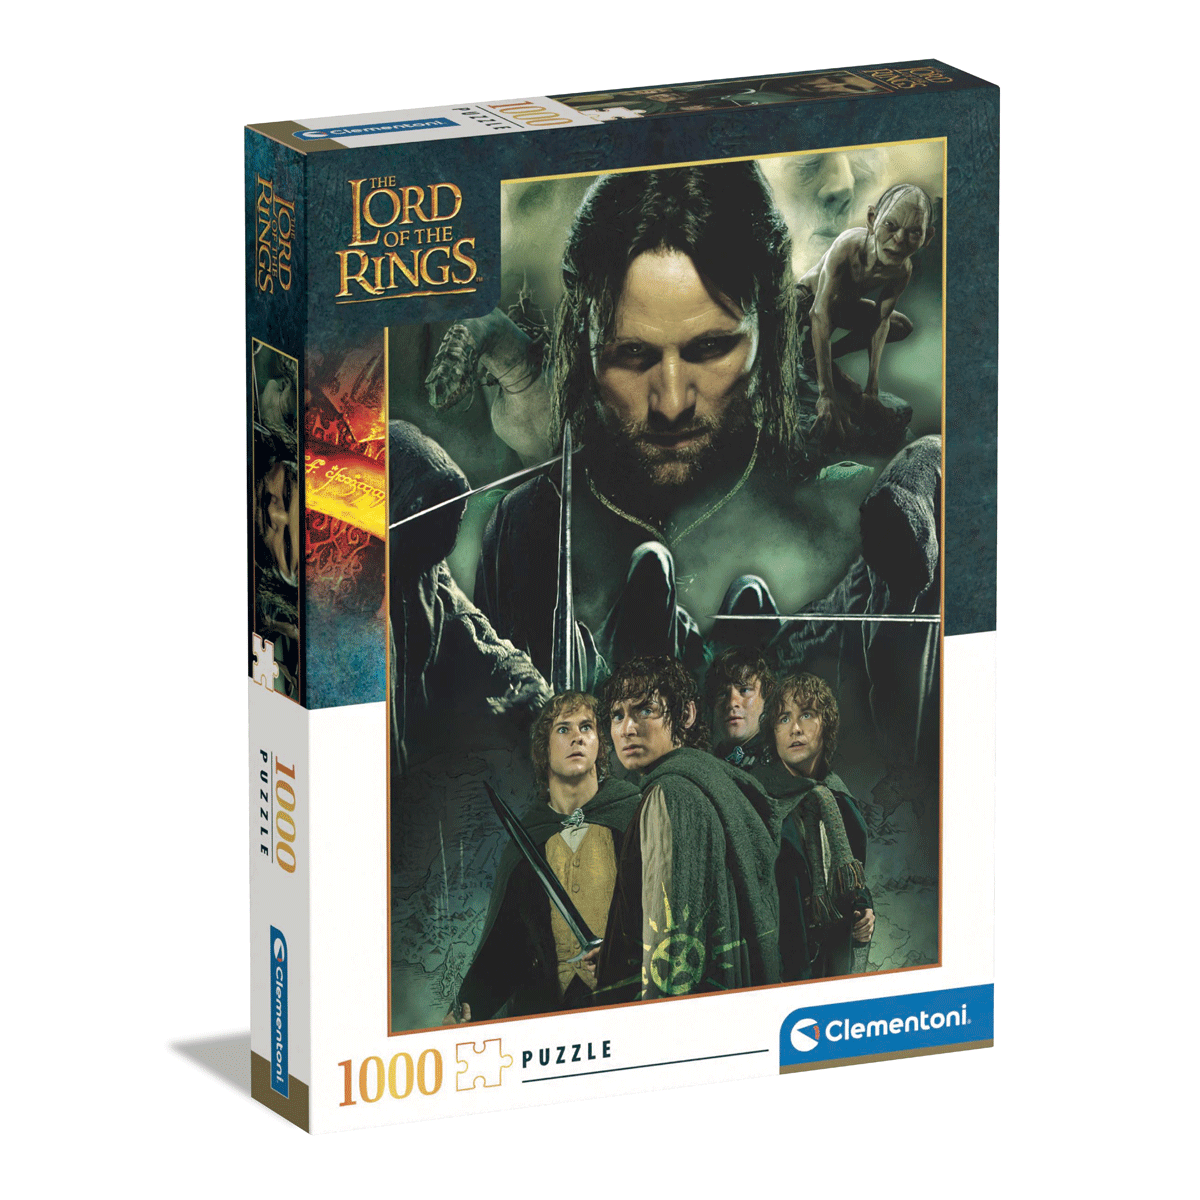 Clementoni puzzle the lord of the rings - 1000 pezzi, puzzle adulti - CLEMENTONI